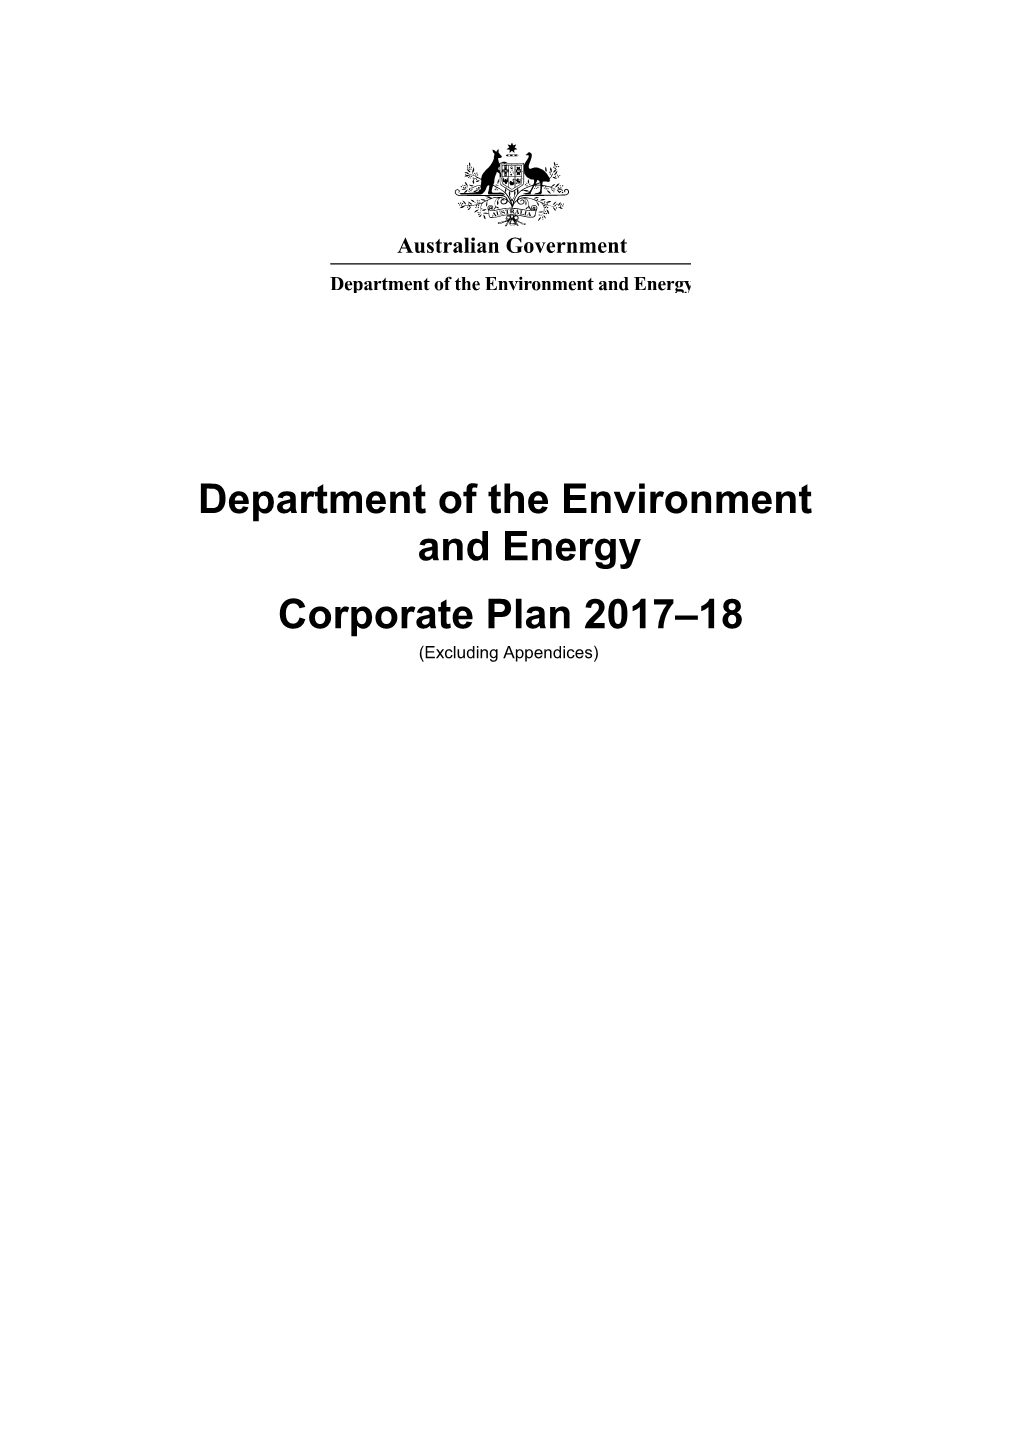 Corporate Plan 2017 18 (Excluding Appendices)